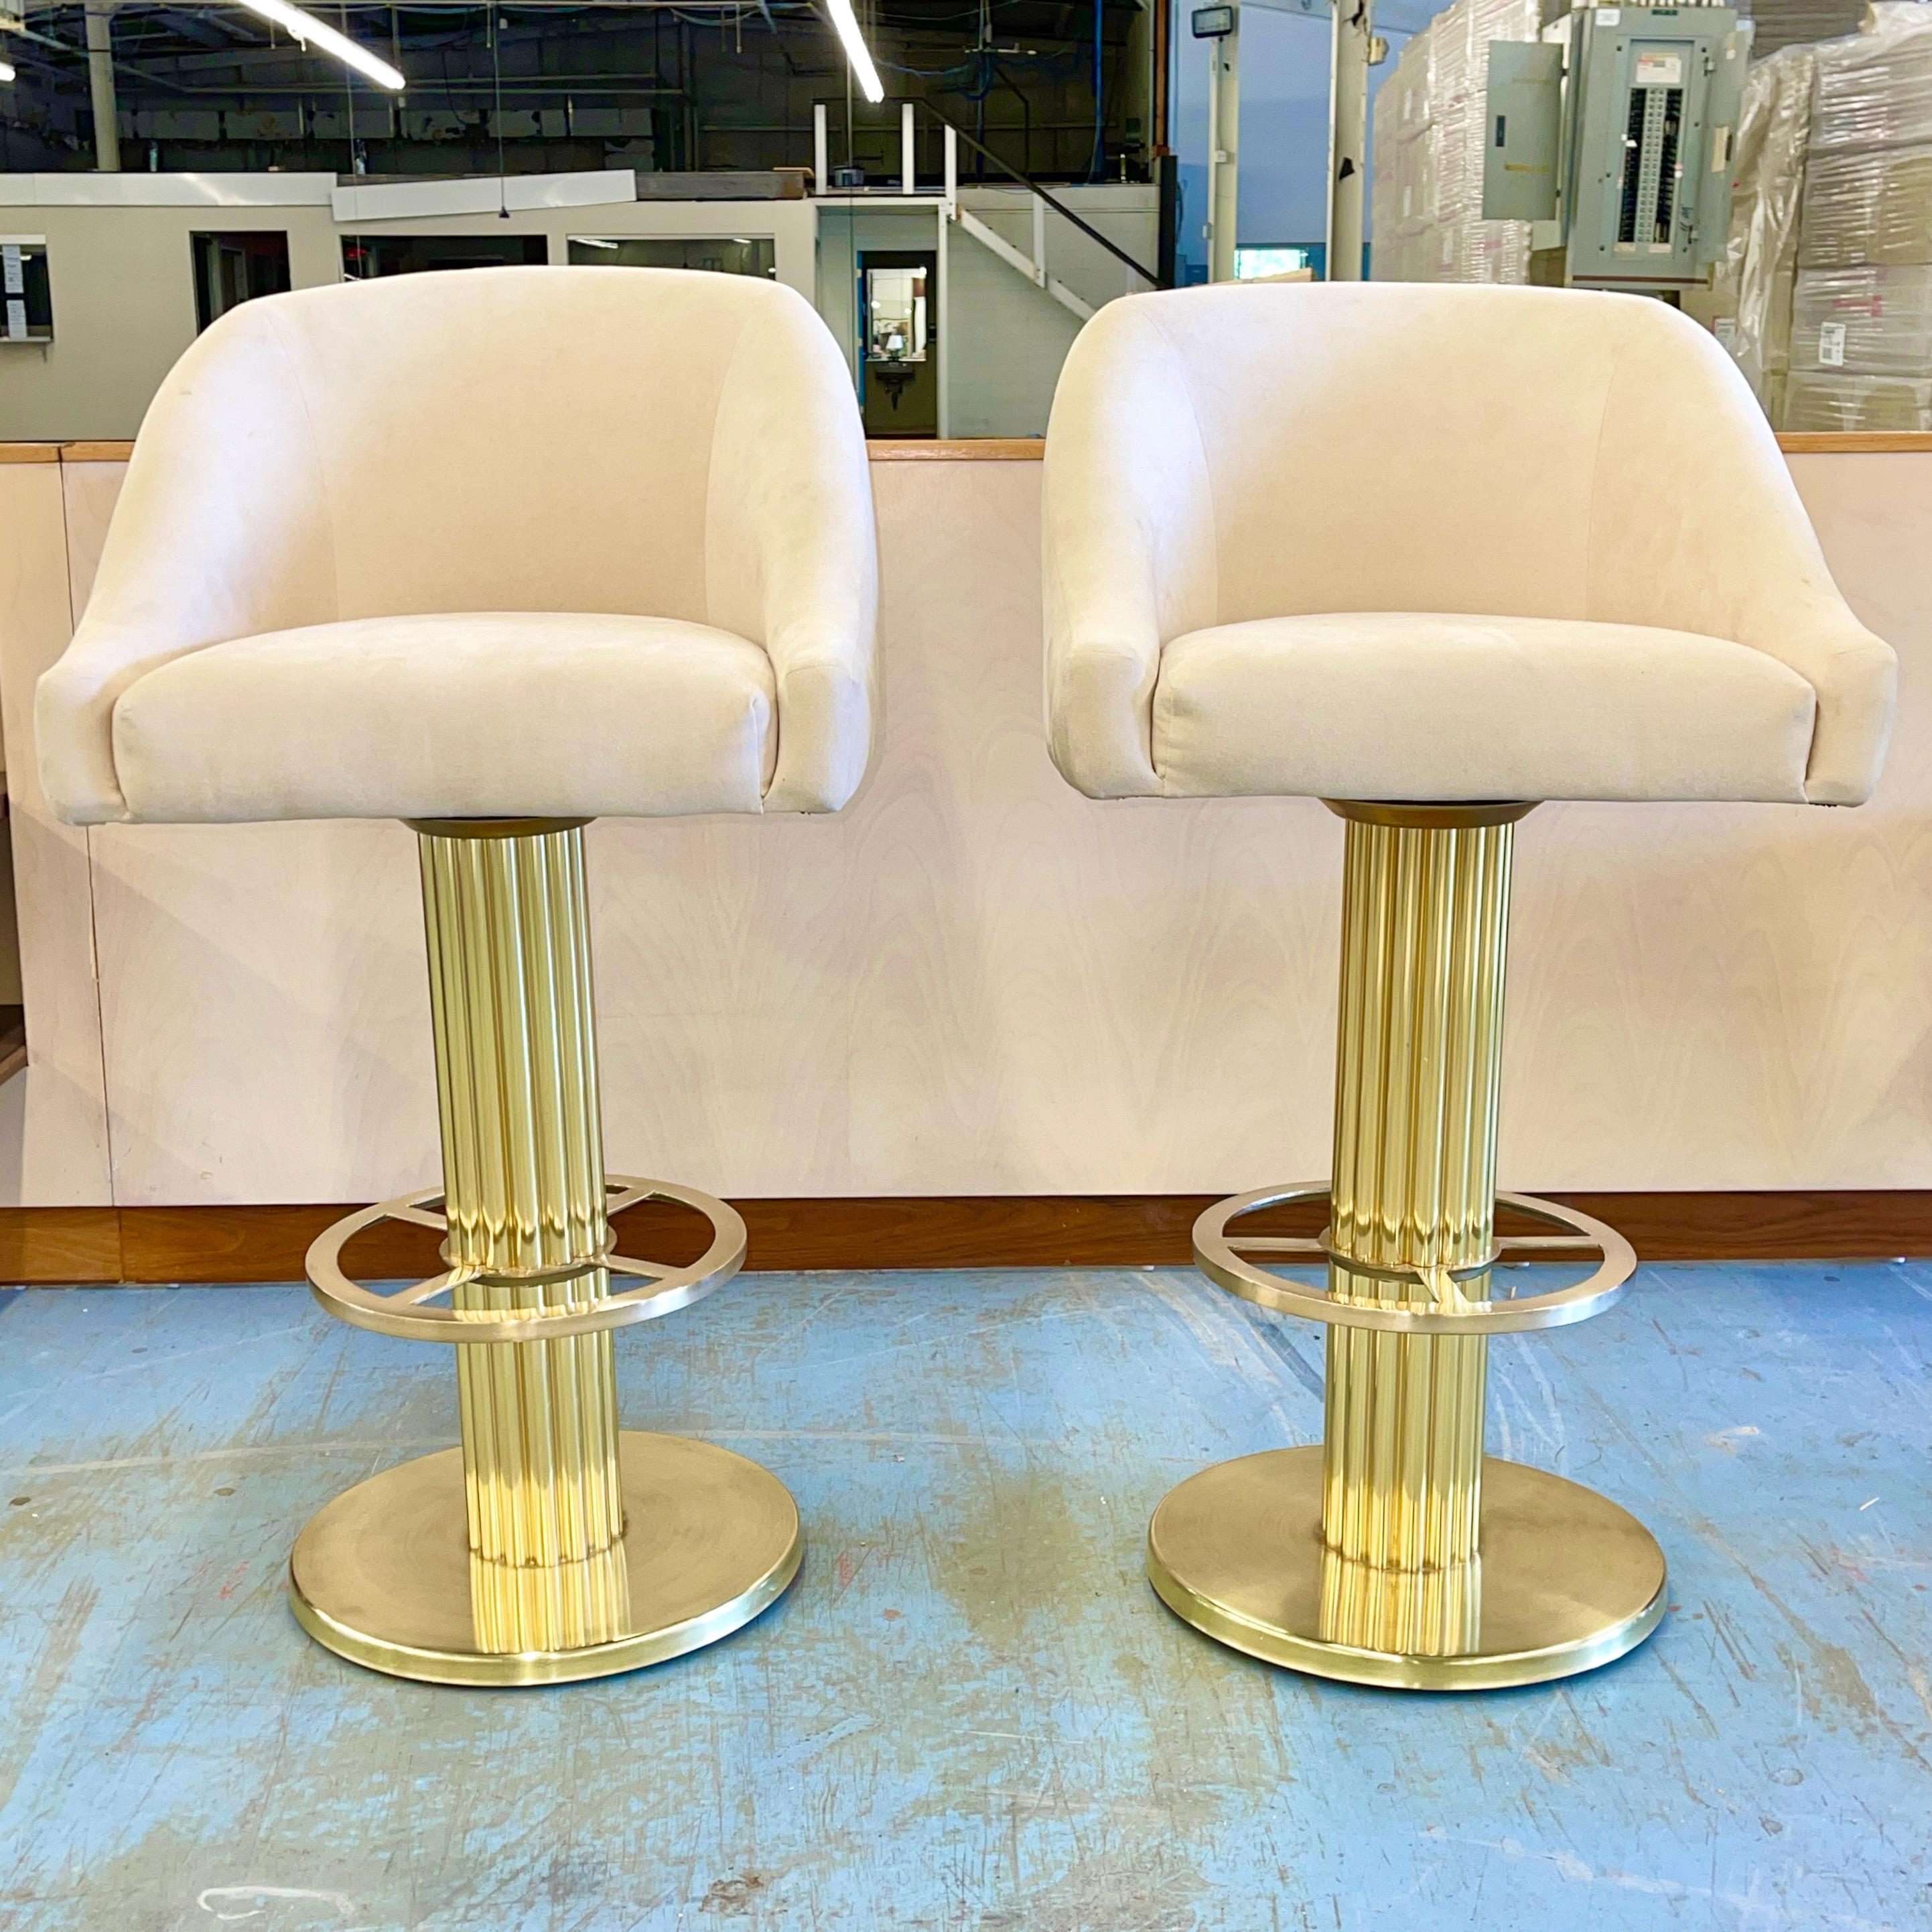 Pair of Excalibur barrel back swivel seat bar stools with solid polished brass bases designed by Howard Kaye of Design for Leisure Ltd. of Mt. Kisco, NY, circa 1988. Patented 1991. Produced 1998, last year of production.
Seats are in their original